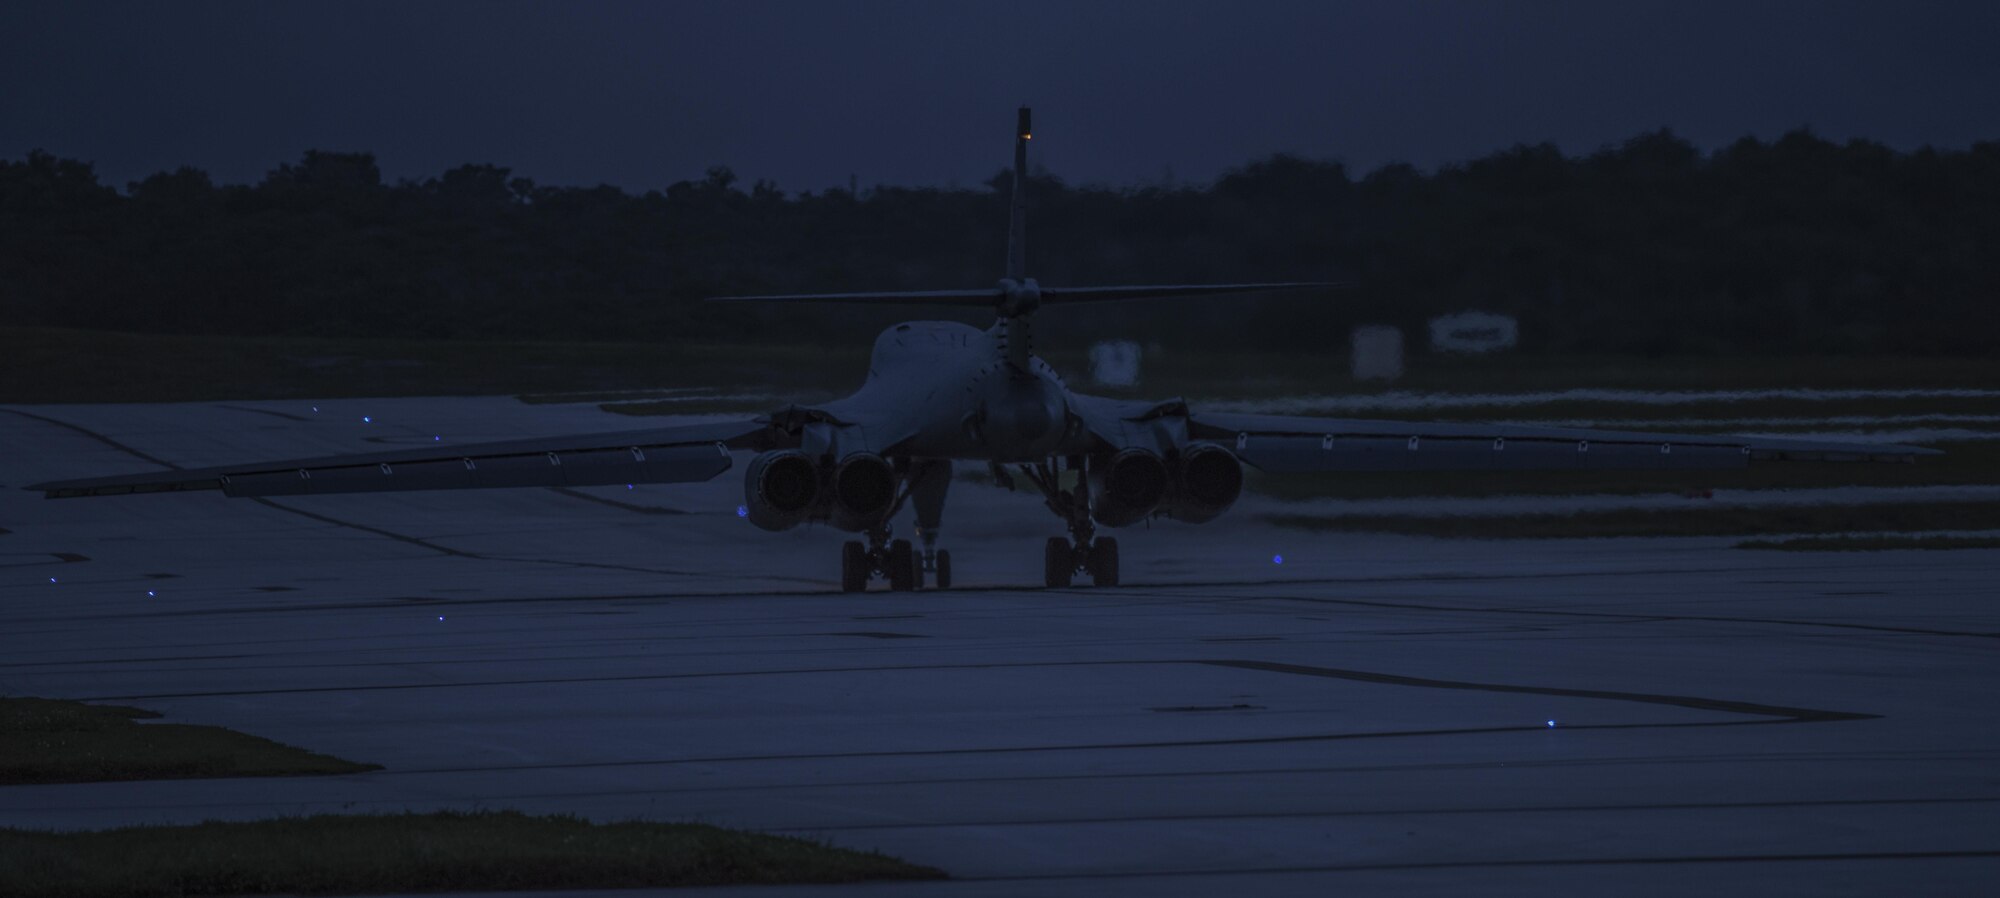 A U.S. Air Force B-1B Lancer assigned to the 9th Expeditionary Bomb Squadron, deployed from Dyess Air Force Base, Texas, prepares to take off from Andersen Air Force Base, Guam, to fly a bilateral mission with two Japan Air Self-Defense Force F-15’s over the East China Sea, July 6, 2017. On conclusion of the bilateral operations, the B-1Bs proceeded to the South China Sea before returning to Andersen Air Force Base. The U.S. conducts continuous bomber presence (CBP) operations as part of a routine, forward deployed, deterrence capability supporting regional security and our allies in the Indo-Asia-Pacific region. (U.S. Air Force photo/Tech. Sgt. Richard P. Ebensberger)